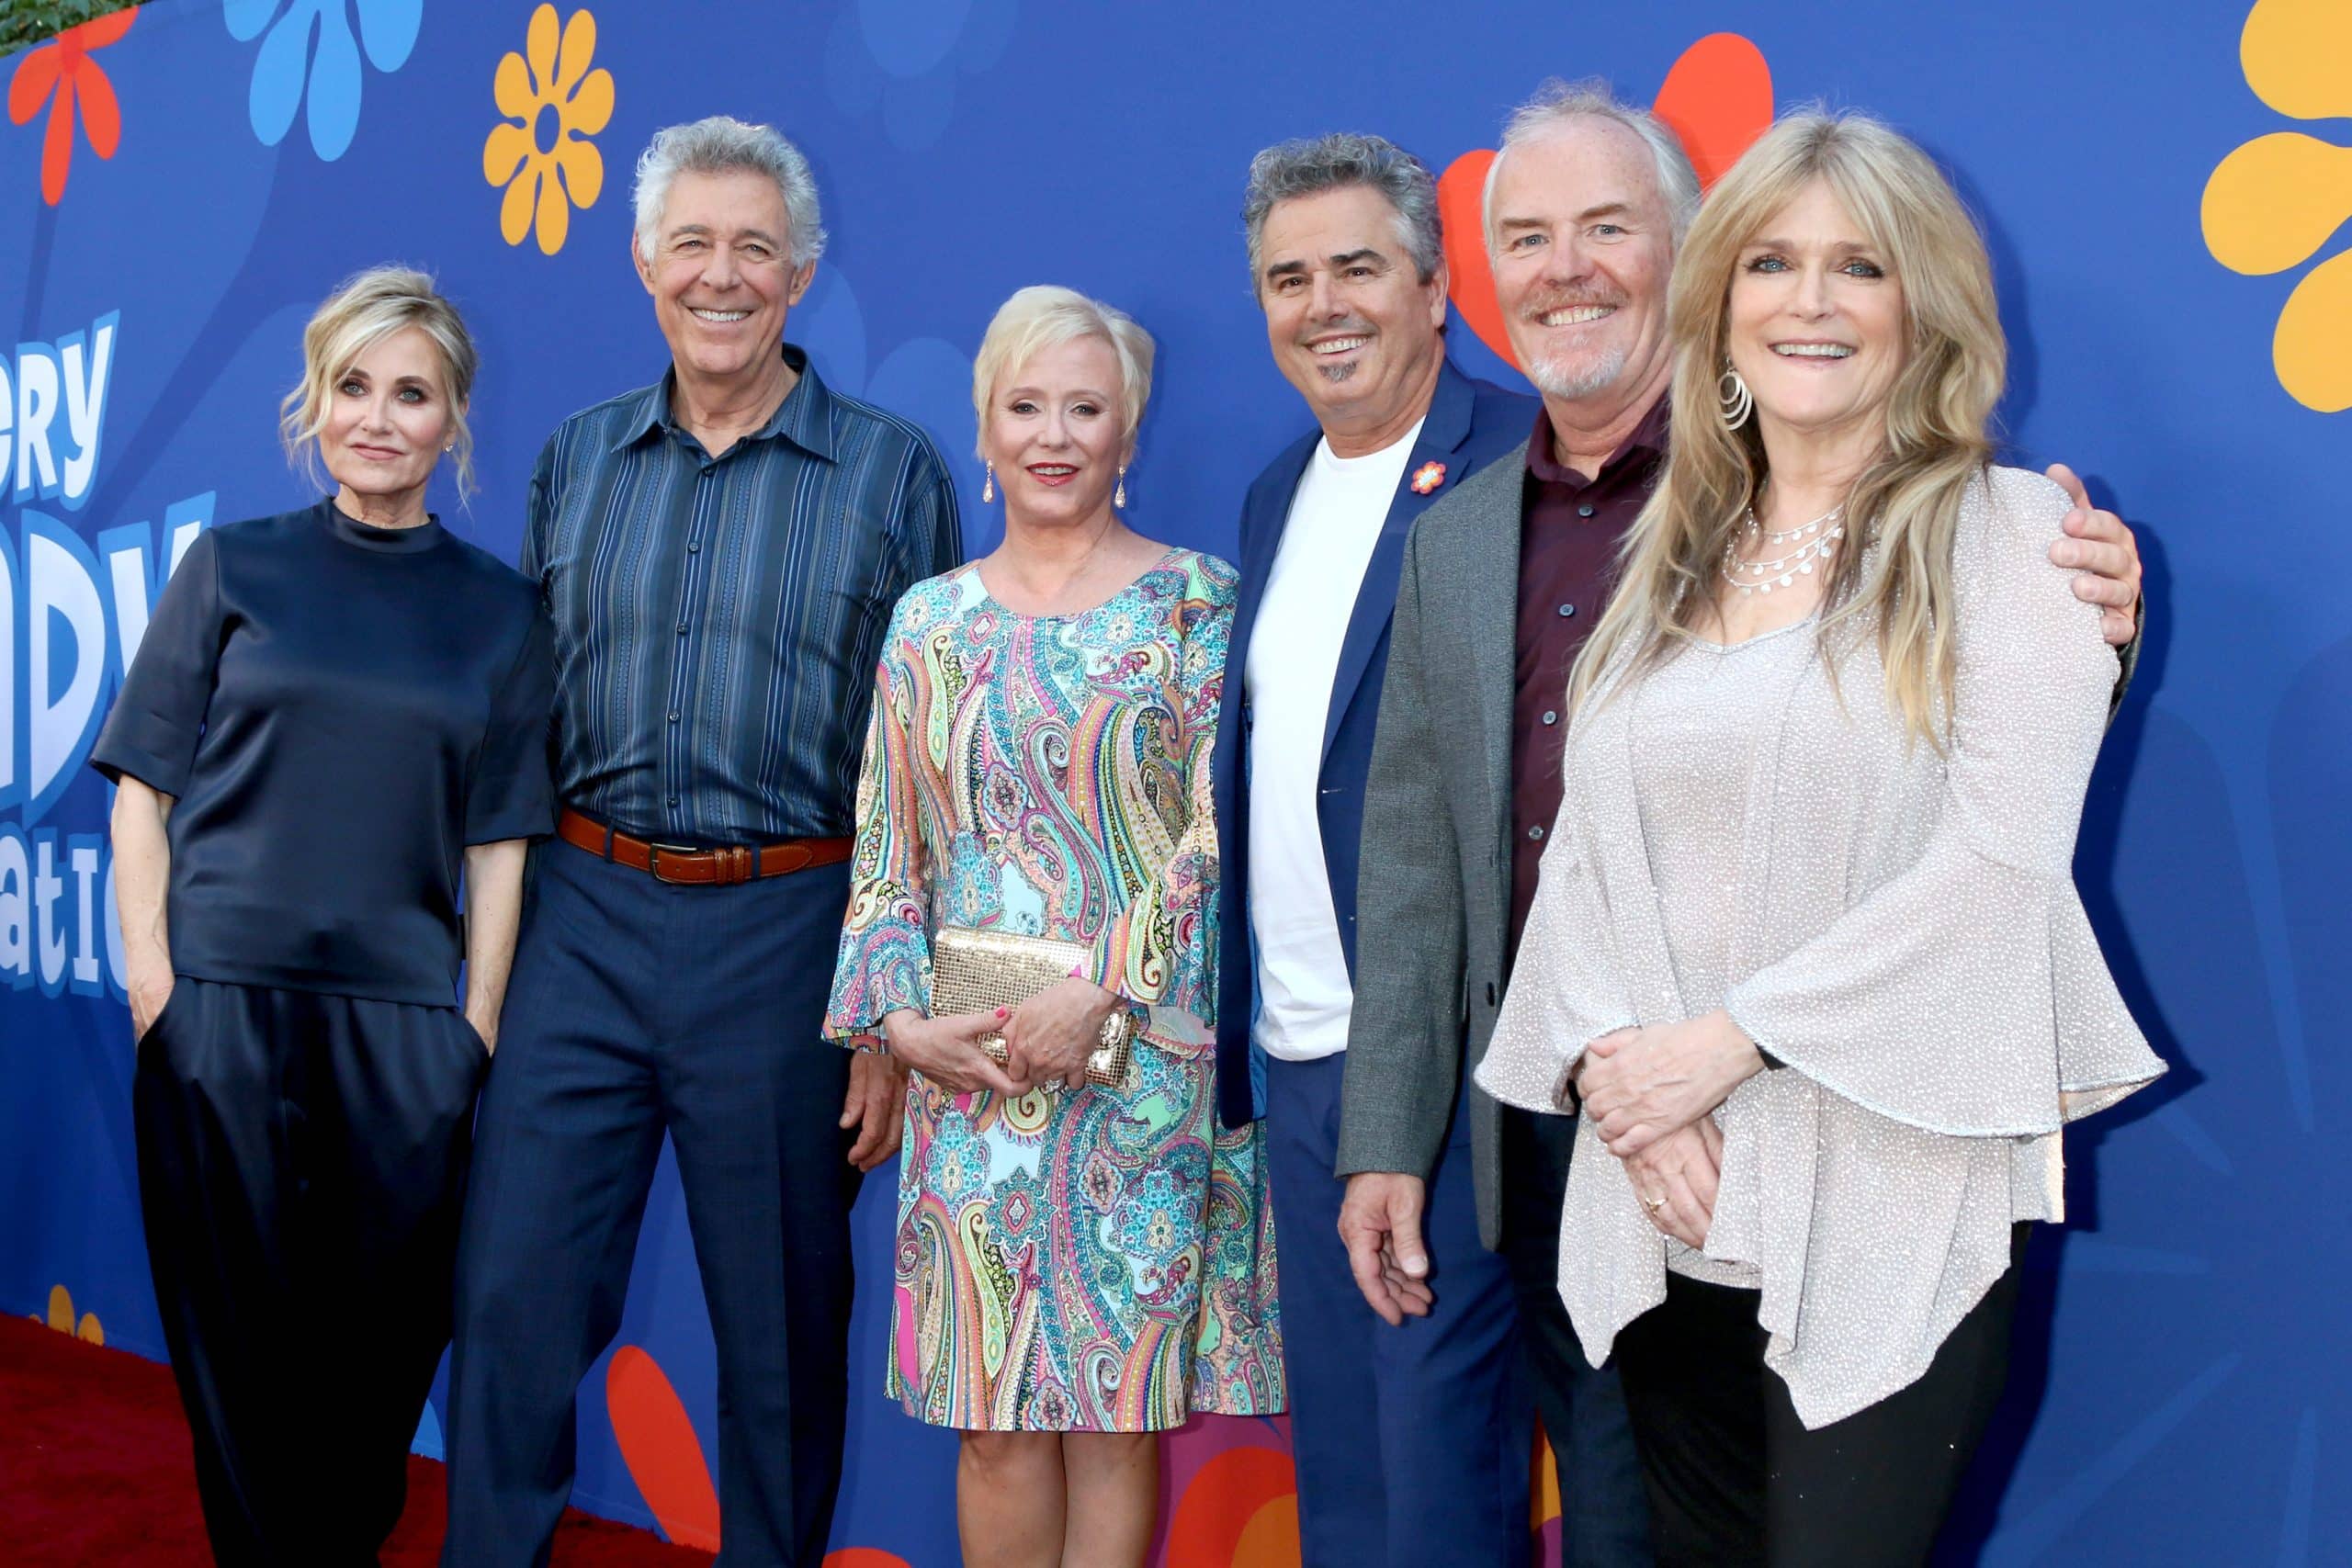 Maureen McCormick, Barry Williams, Eve Plumb, Christopher Knight, Mike Lookinland, Susan Olsen at the "A Very Brady Renovation" Premiere Event 